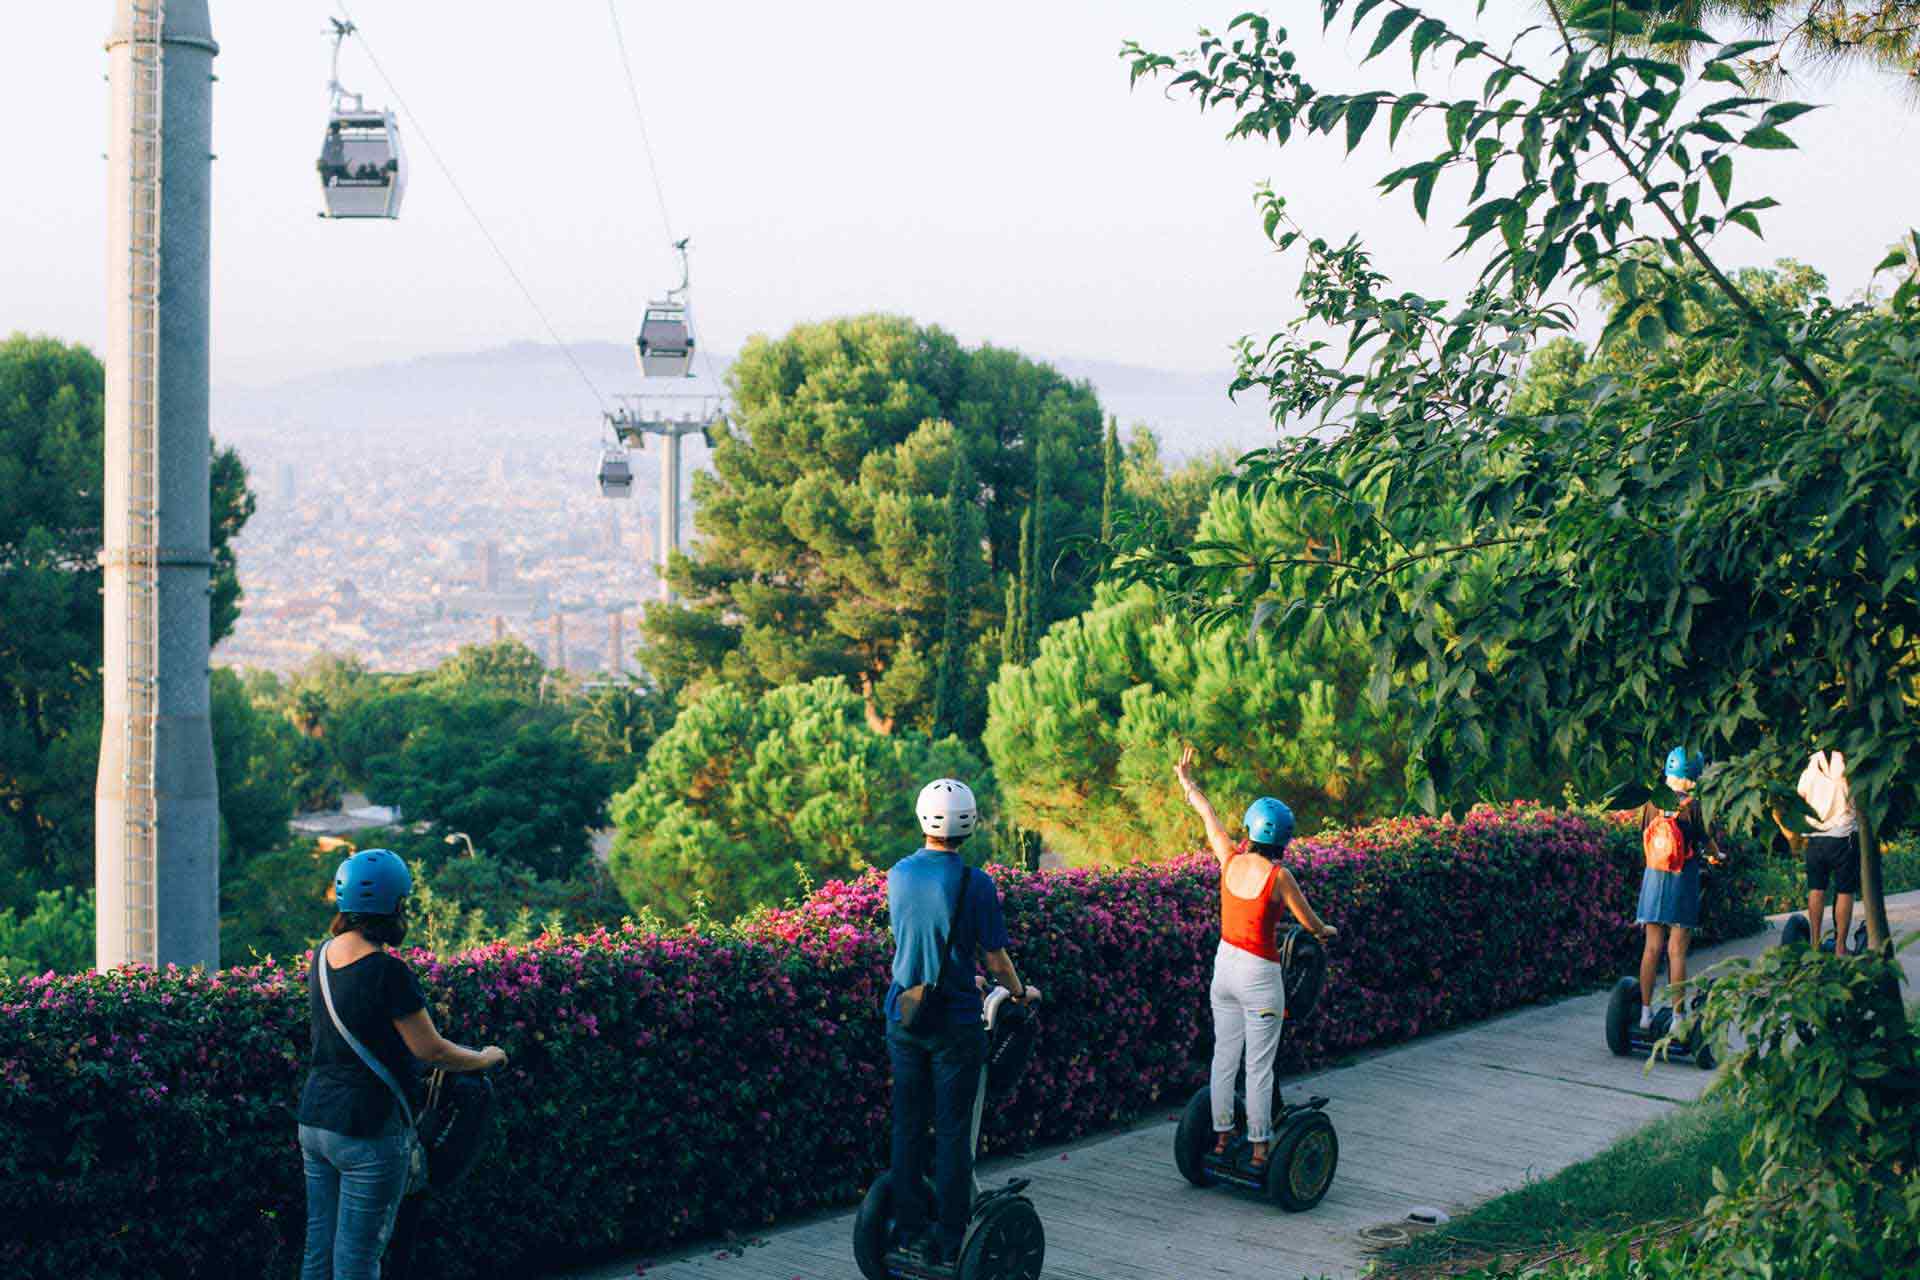 Segways in the Montjuic Park - funicular view